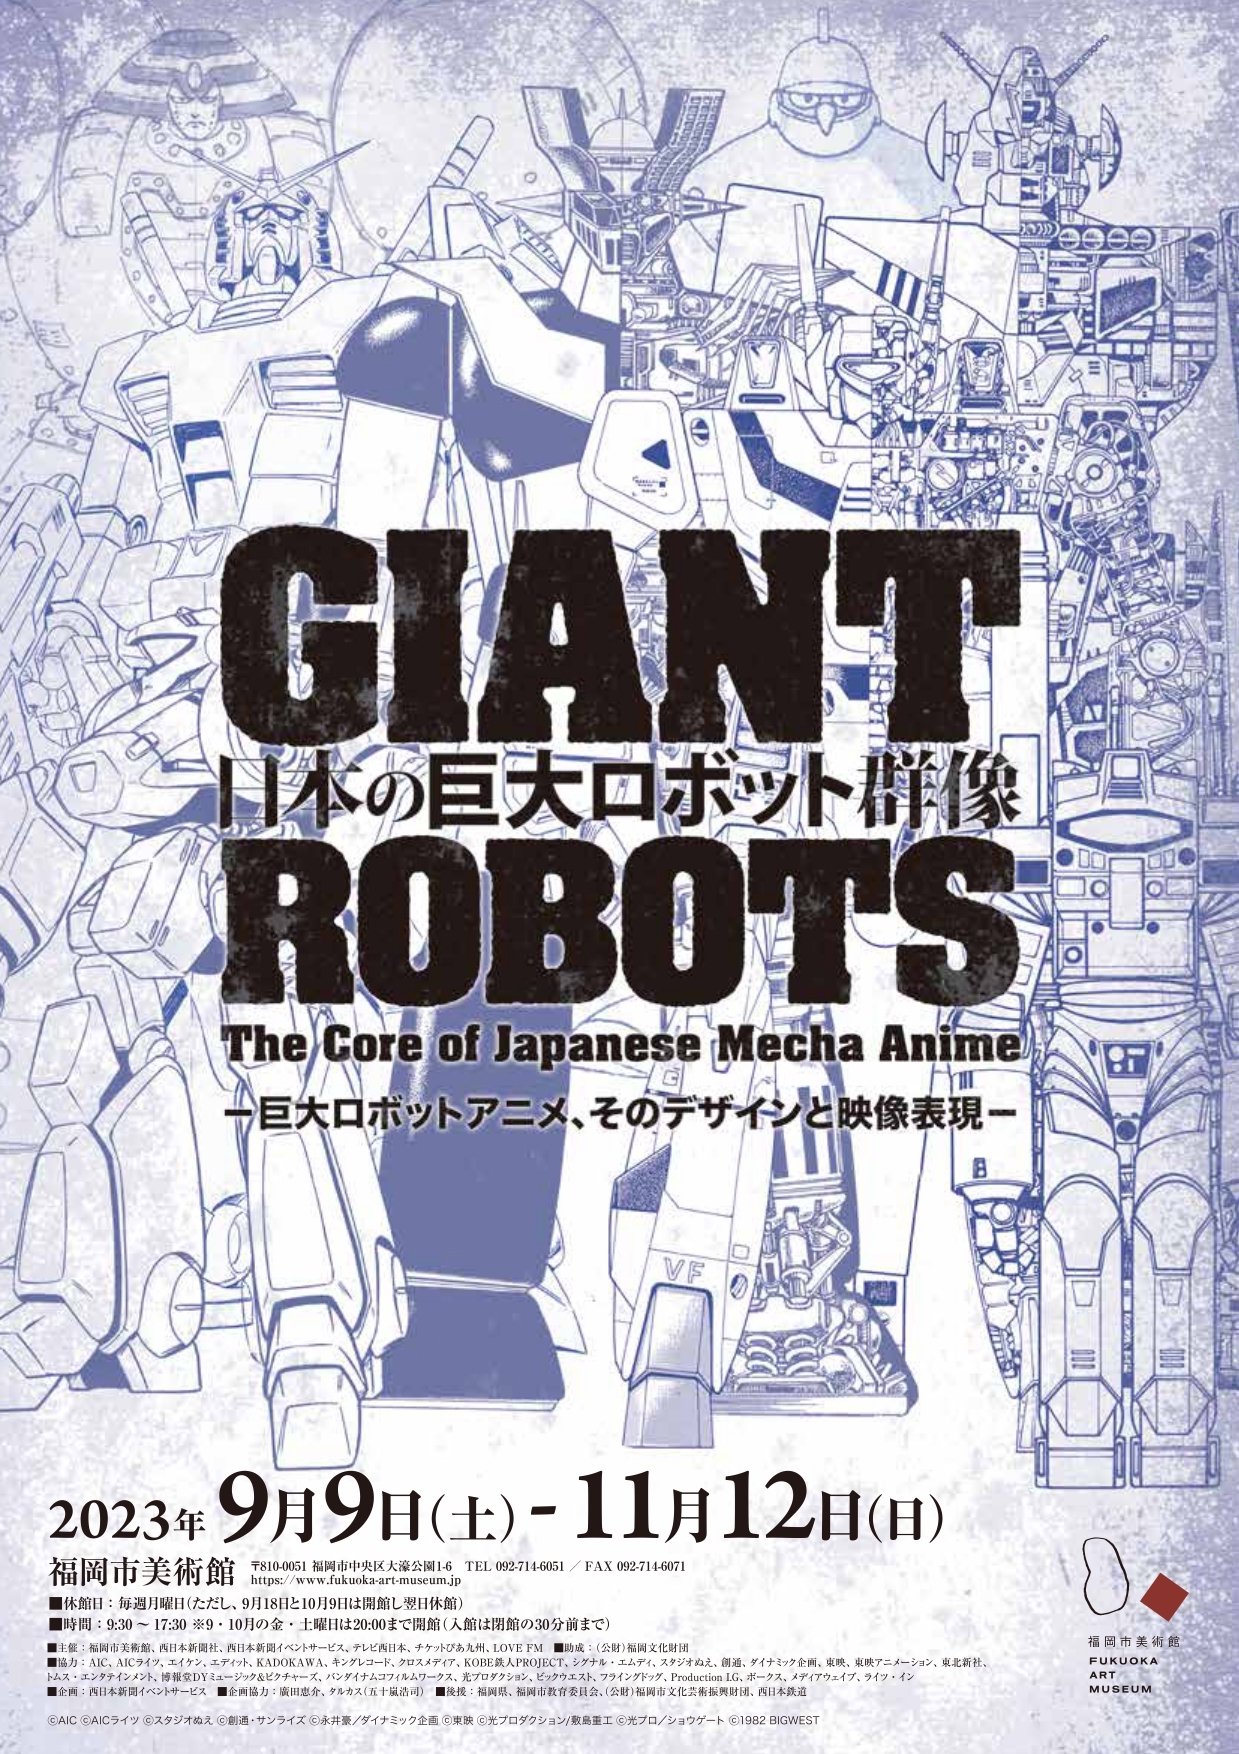 Details more than 142 anime featuring giant robots super hot 3tdesign